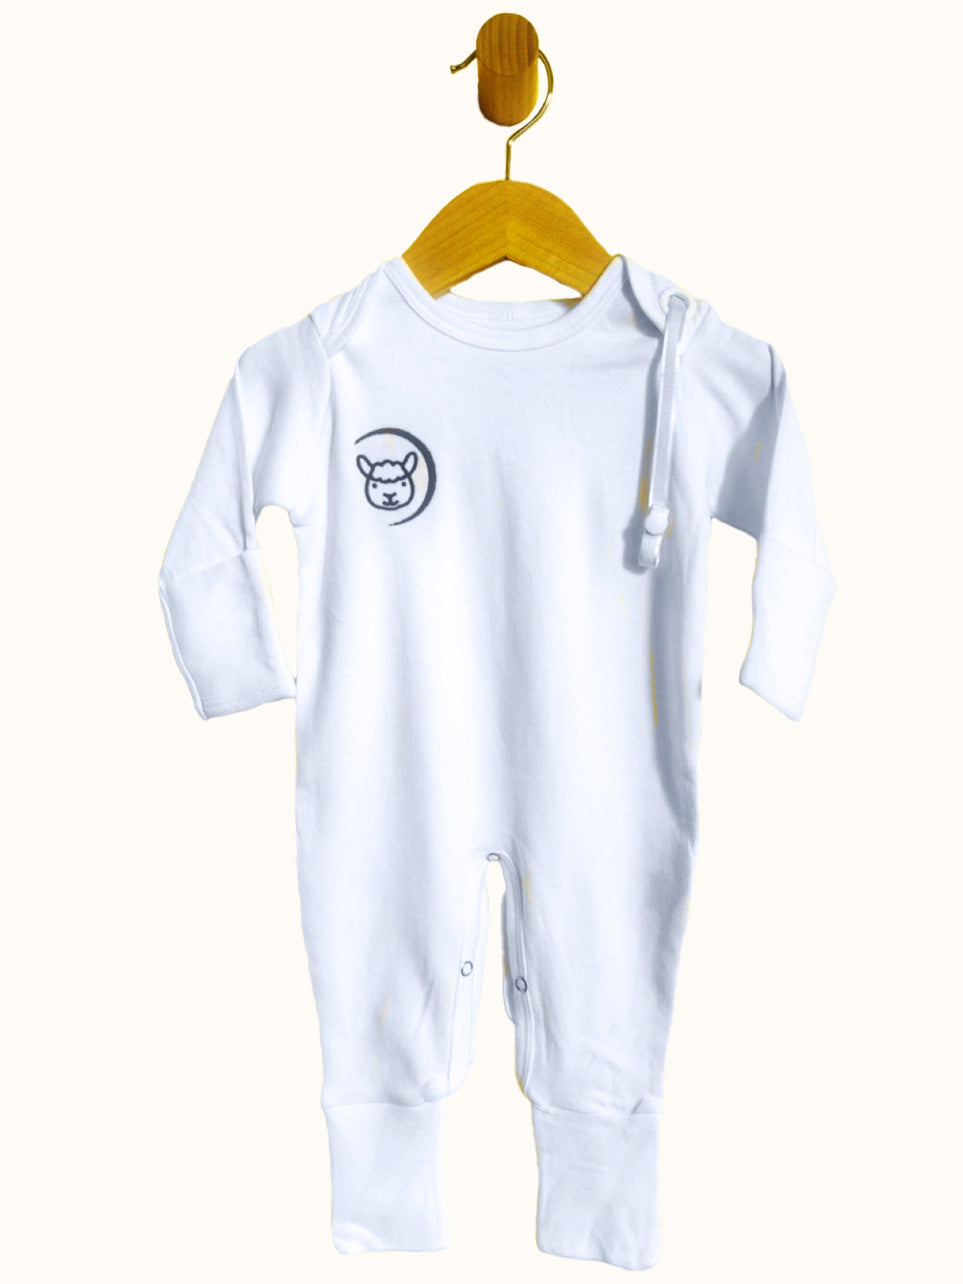 White long sleeve Baby Bodysuit with pacifier strap and snap crotch